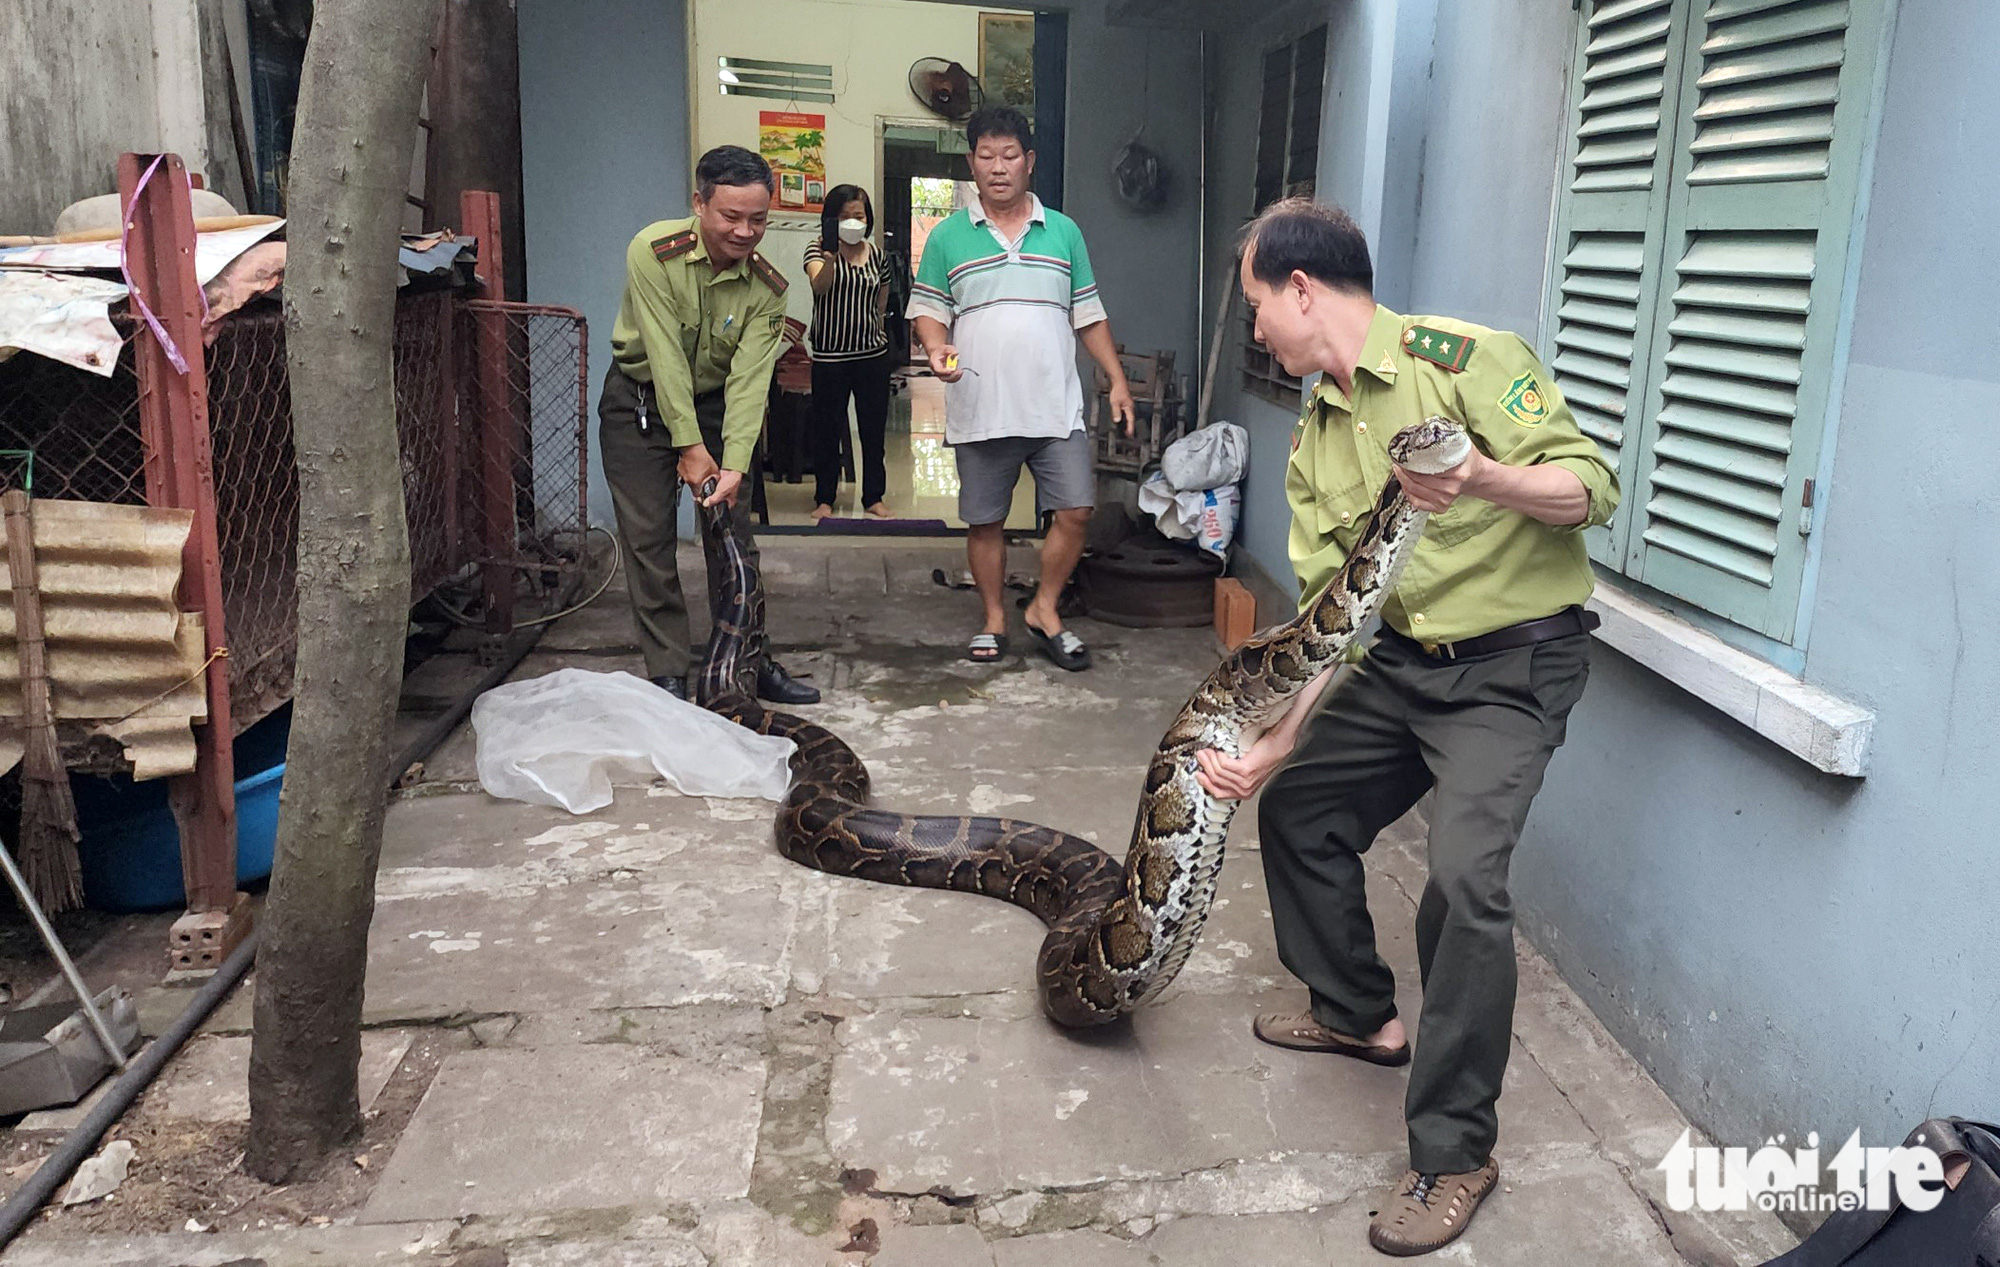 Forest protection officers carry the anesthetized python out of Dang Dinh Quoc's house in Hoc Mon District, Ho Chi Minh City. Photo: Ngoc Khai / Tuoi Tre